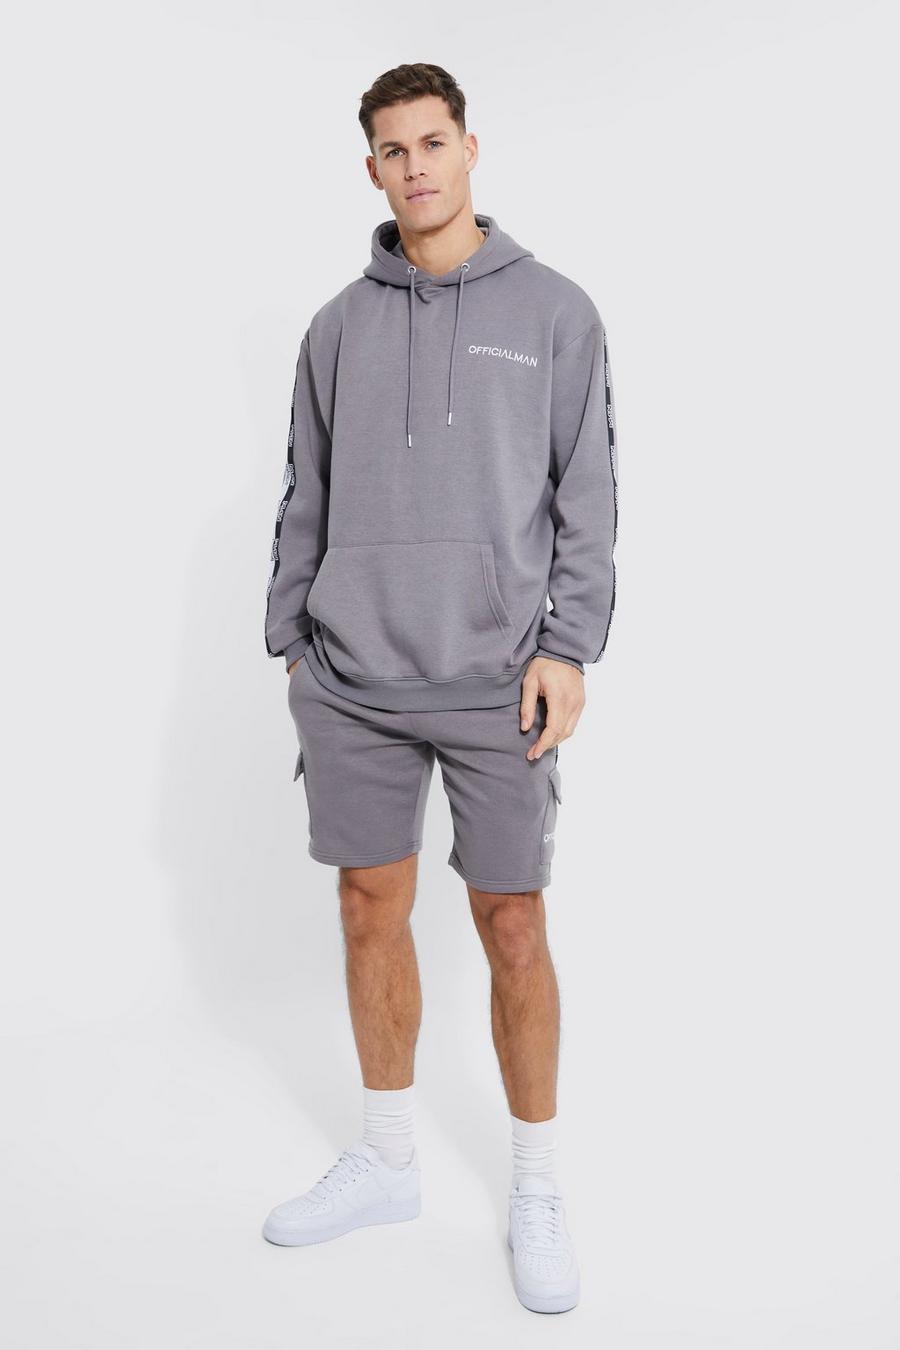 Mens Tall Tracksuits | Tracksuits For Tall Men | boohoo UK